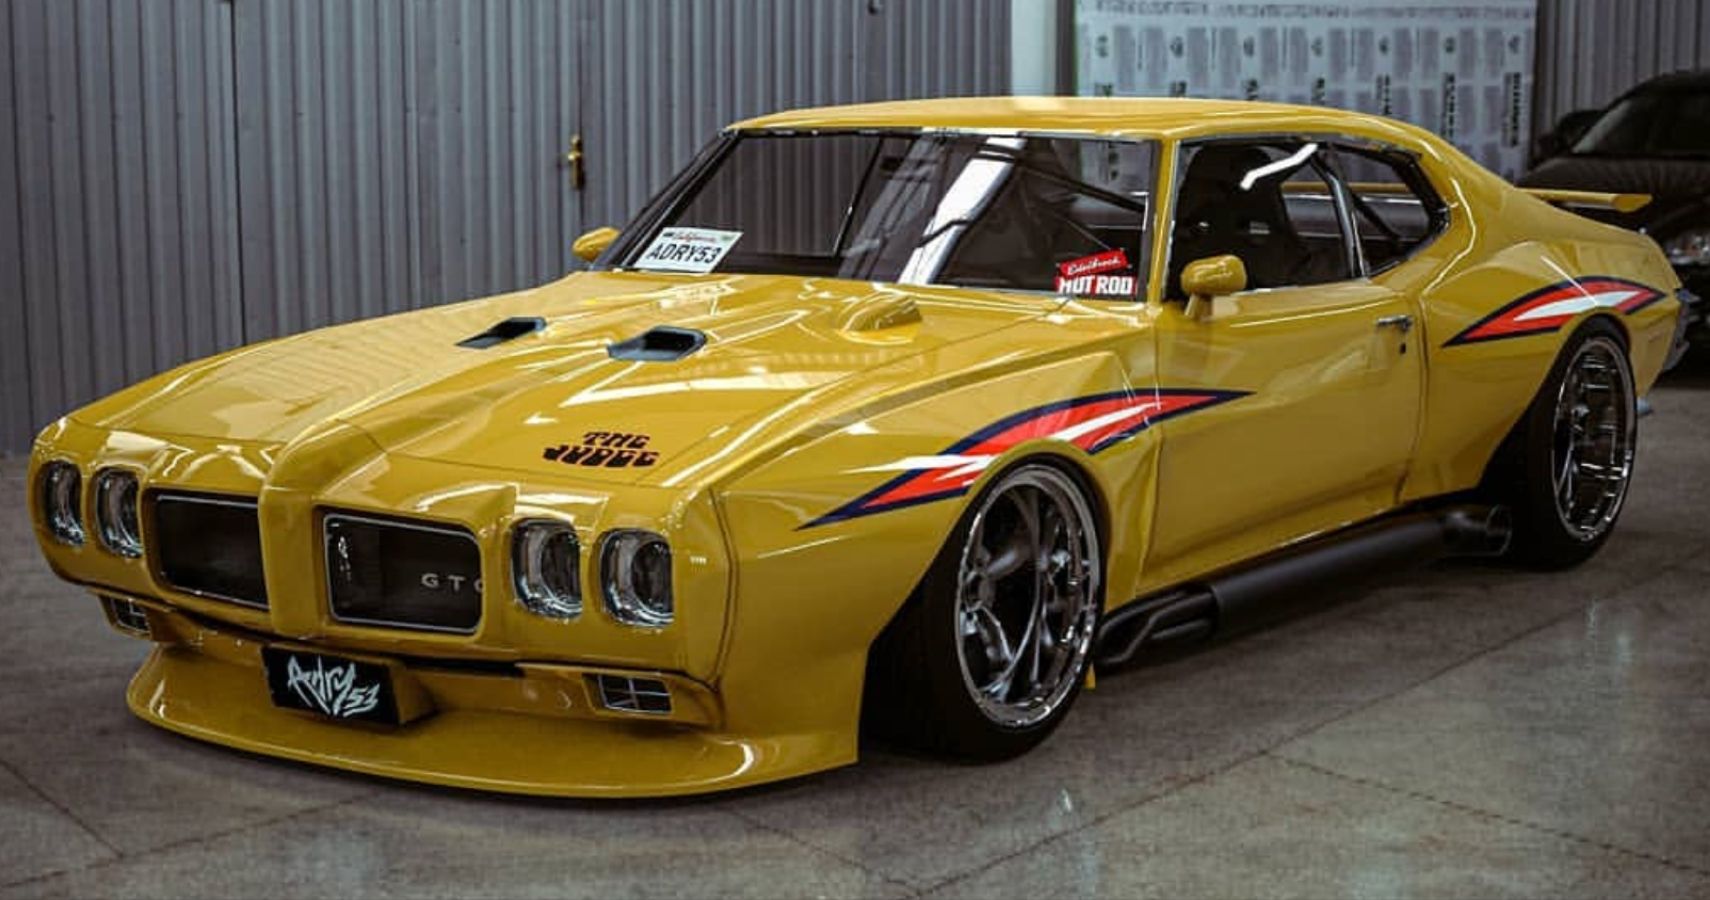 Widebody 1970 Pontiac GTO Judge Rendering Gives Off Trans-Am Racing Vibes